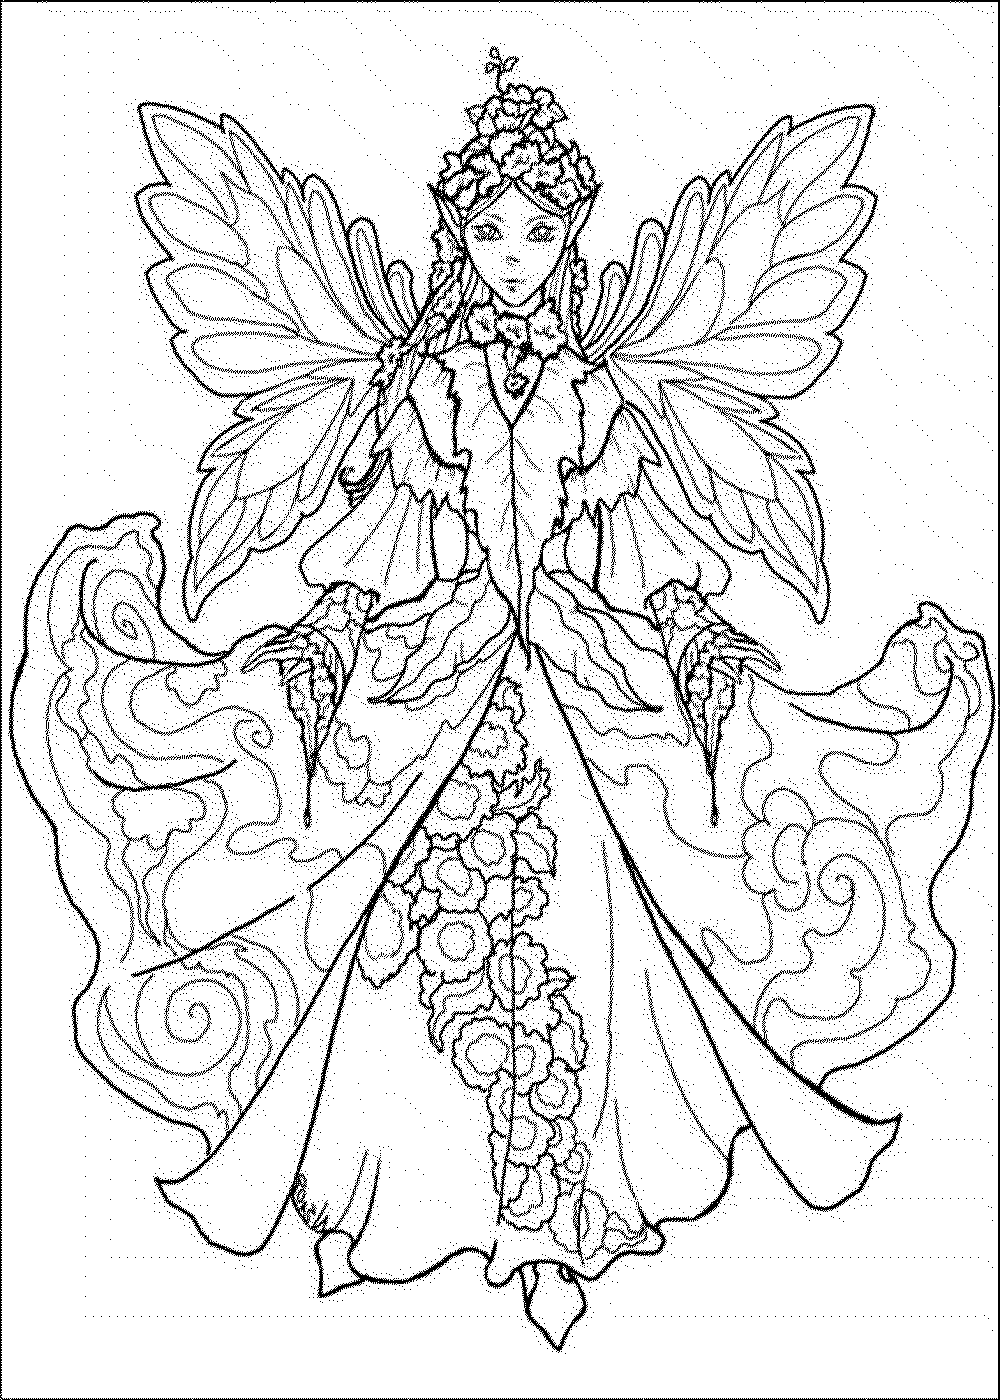 Cool Fairy Princess Coloring Pages For Adults   VoteForVerde.com ...